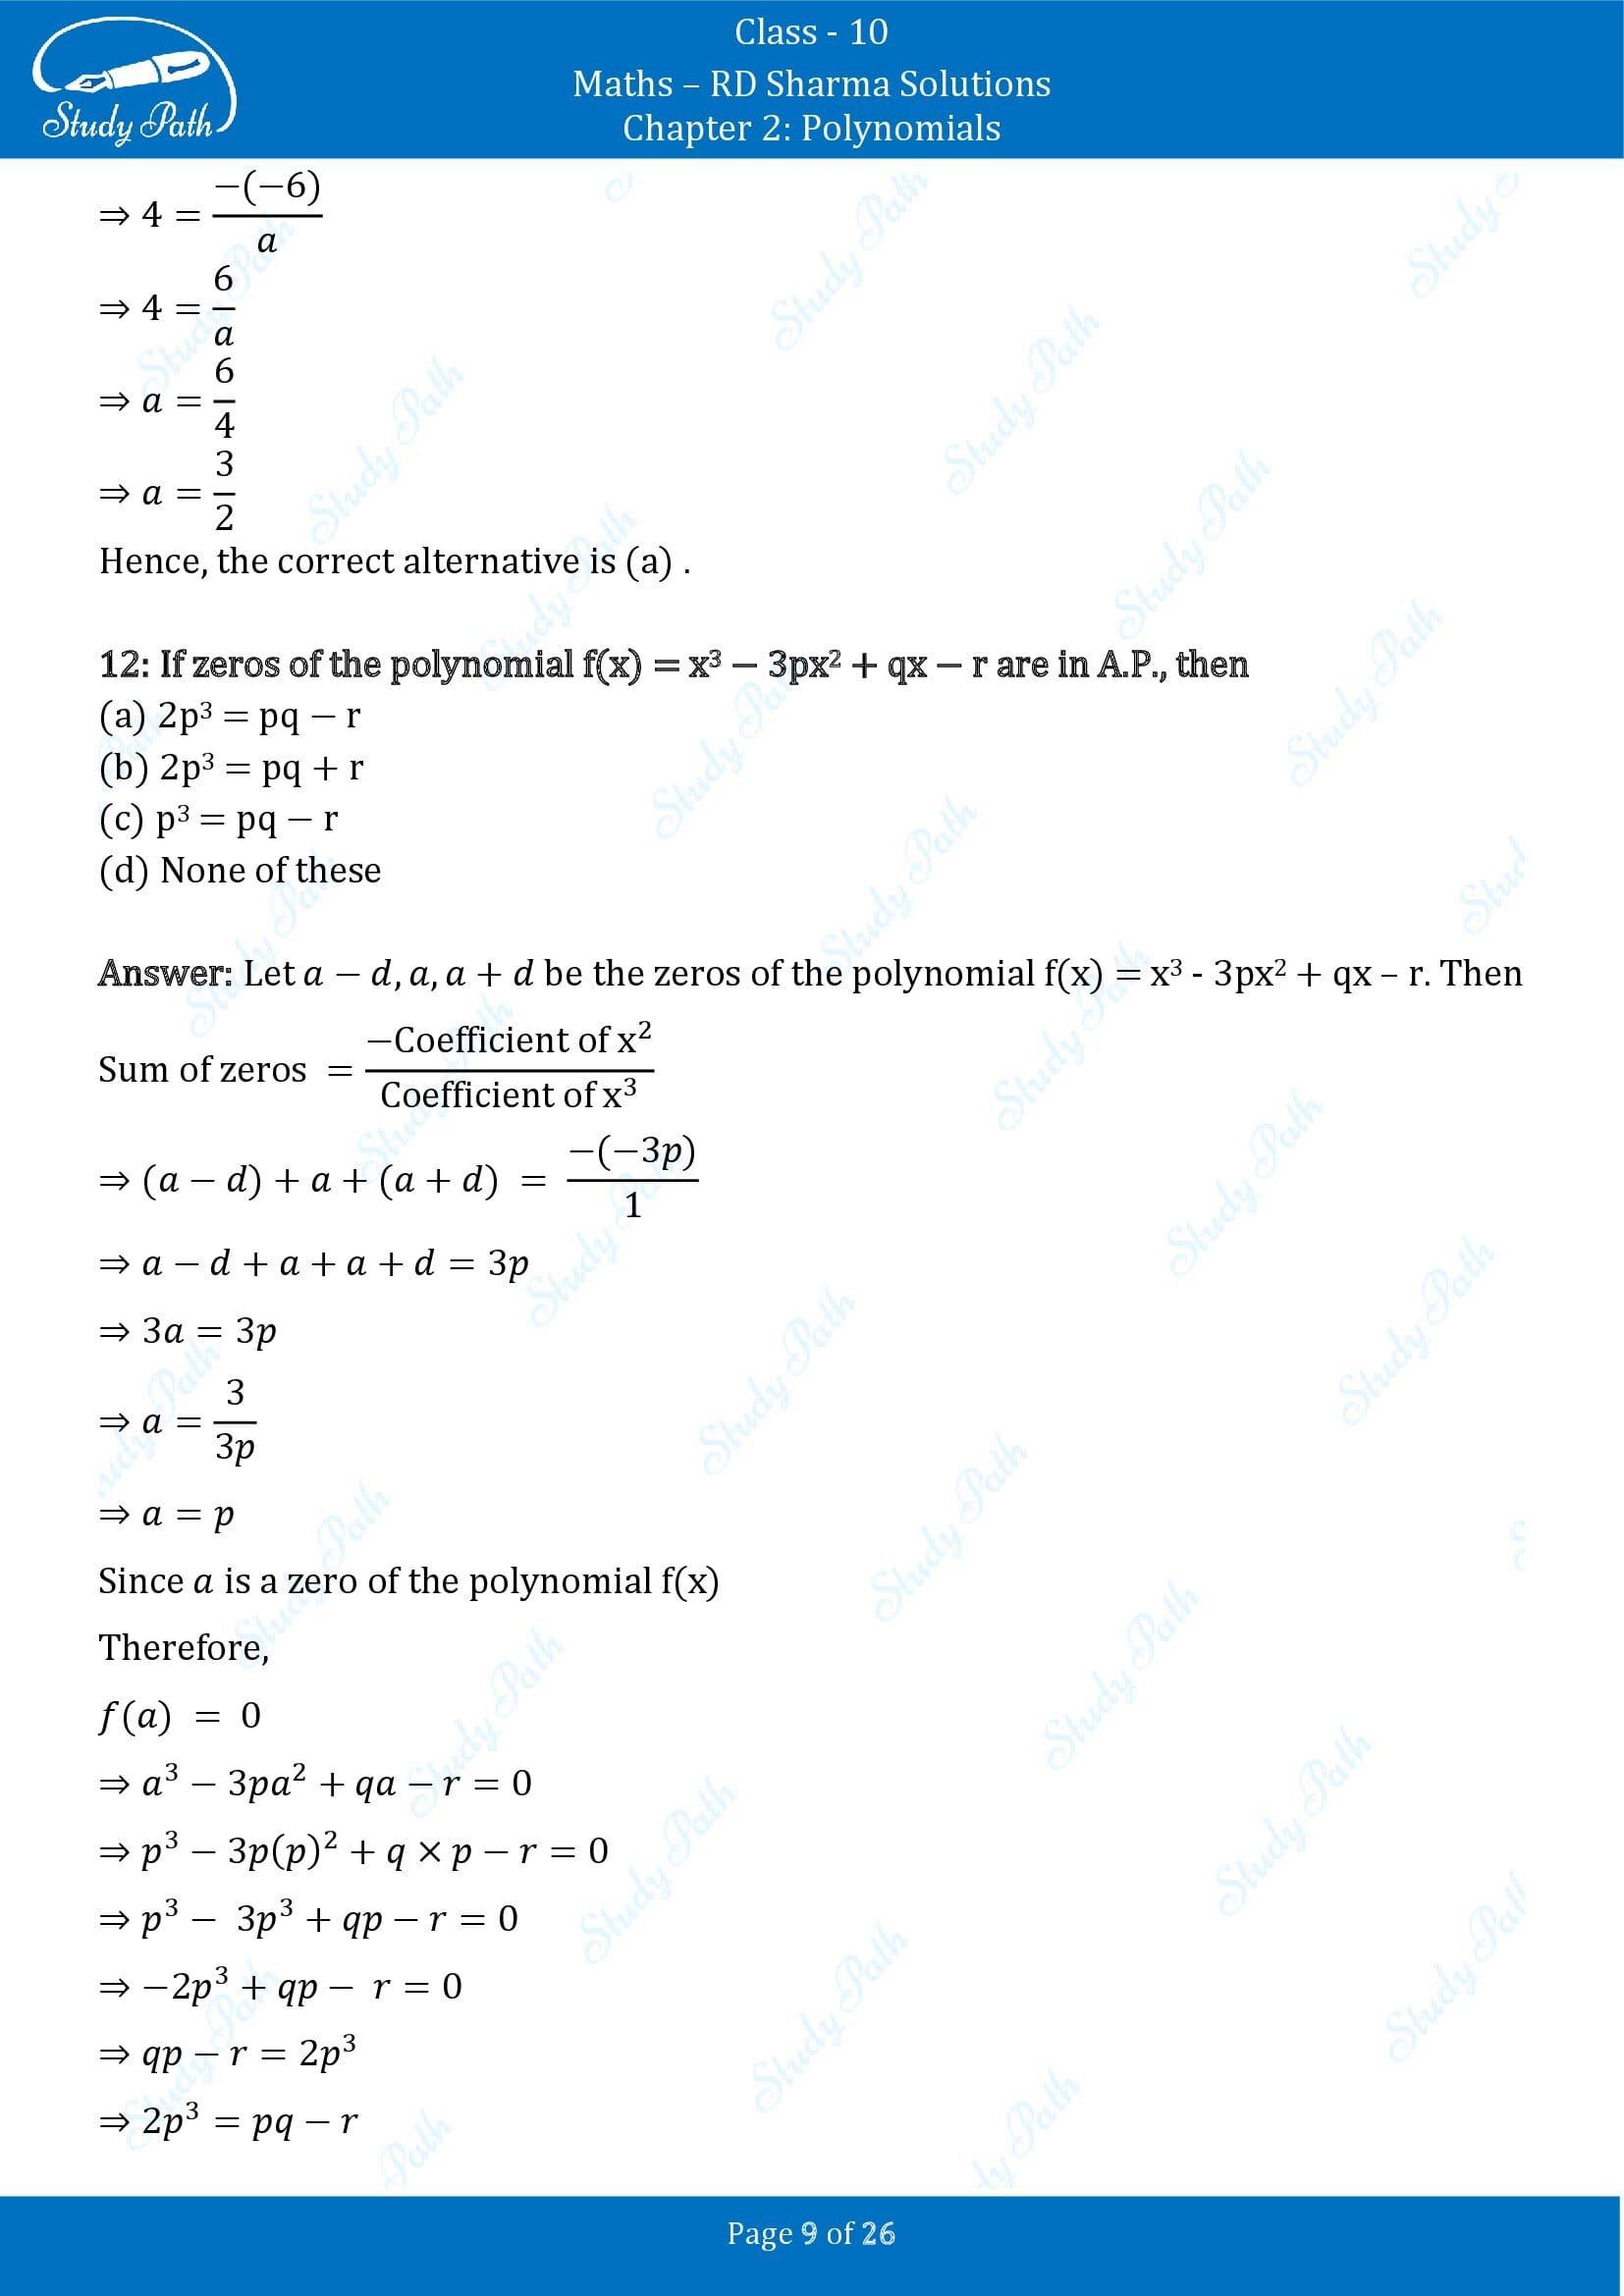 RD Sharma Solutions Class 10 Chapter 2 Polynomials Multiple Choice Questions MCQs 00009